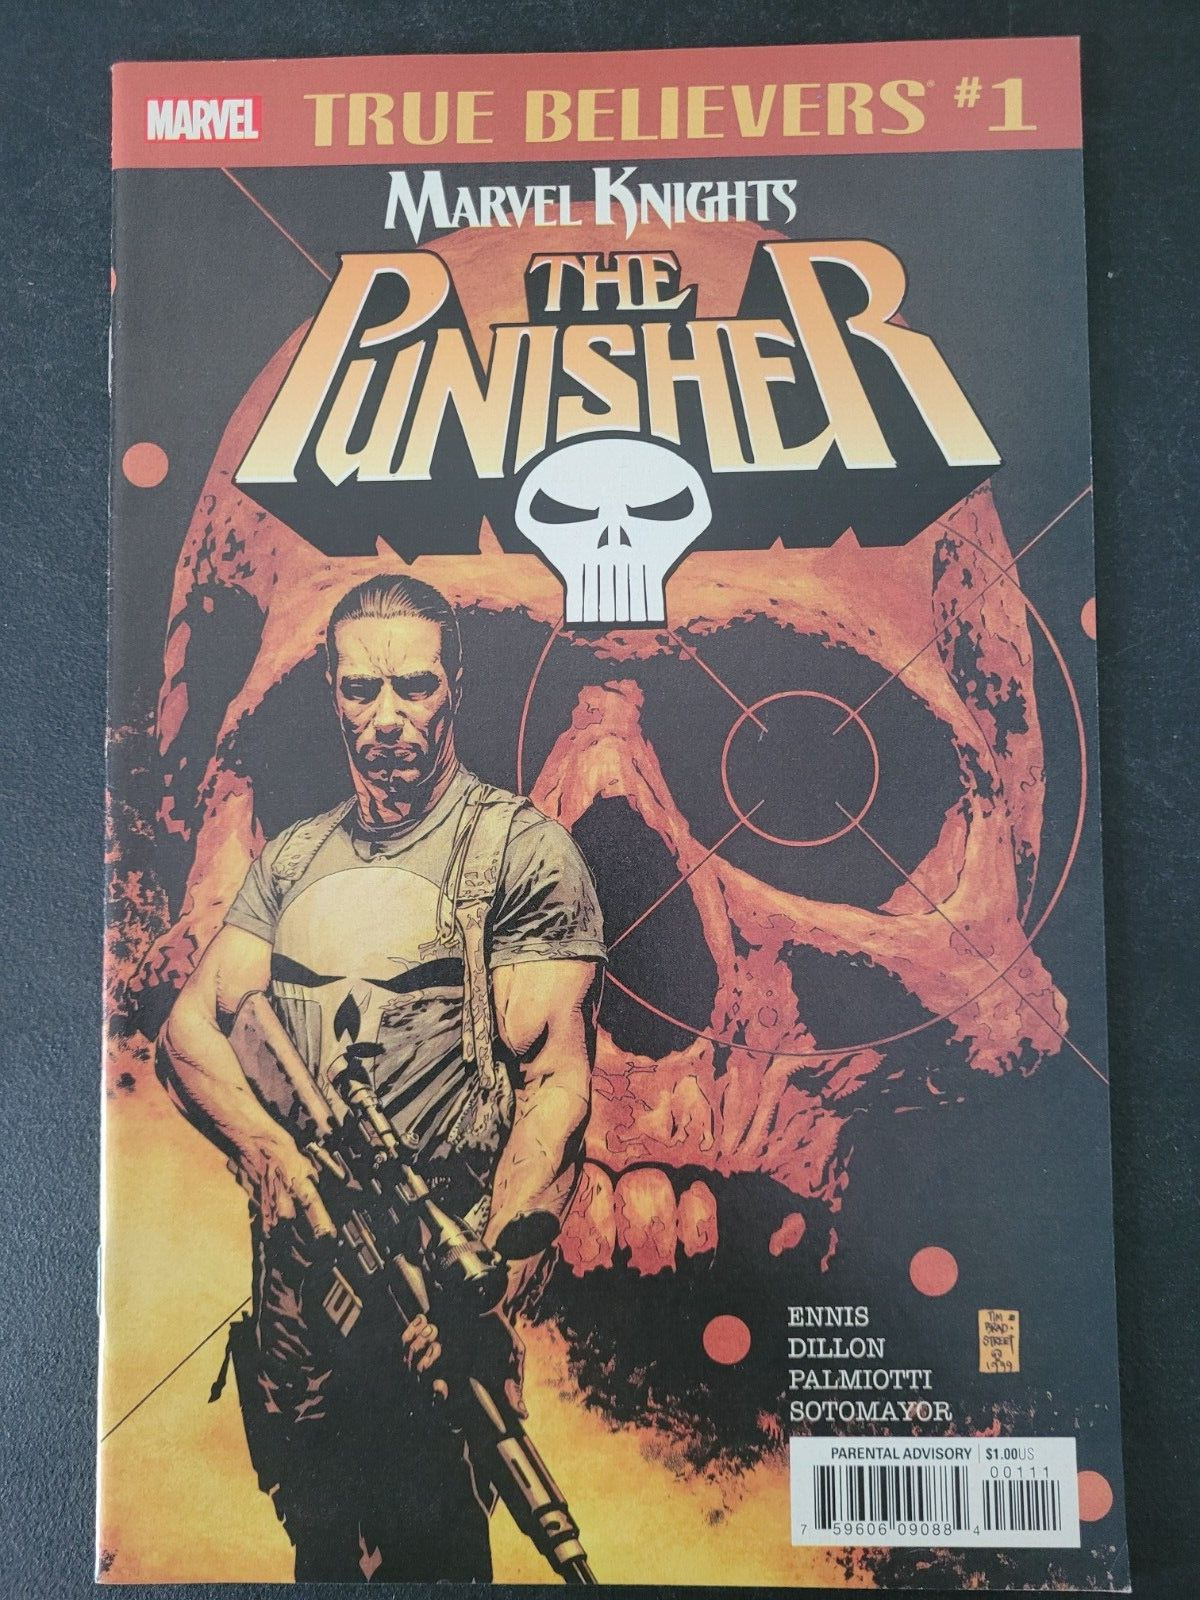 TRUE BELIEVERS: THE PUNISHER #1  MARVEL KNIGHTS 20TH ANNIVERSARY SPECIAL